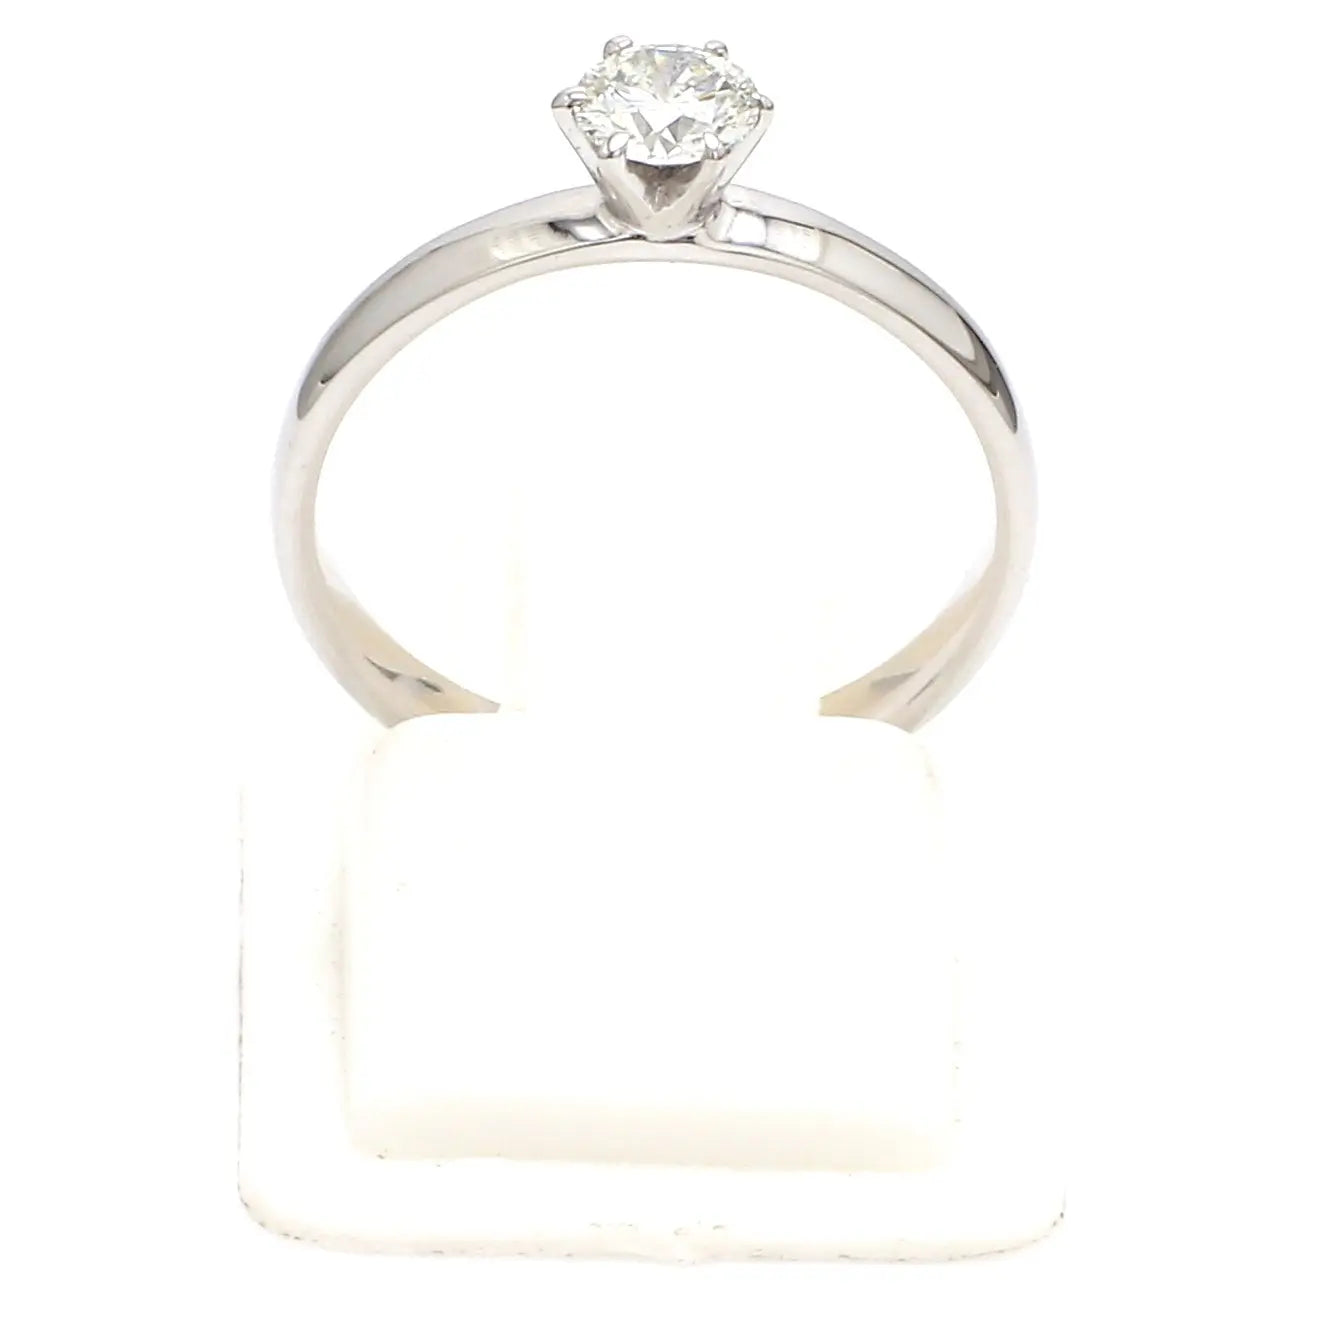 Classic 6 Prong Solitaire Ring made in Platinum SKU 0011   Jewelove.US